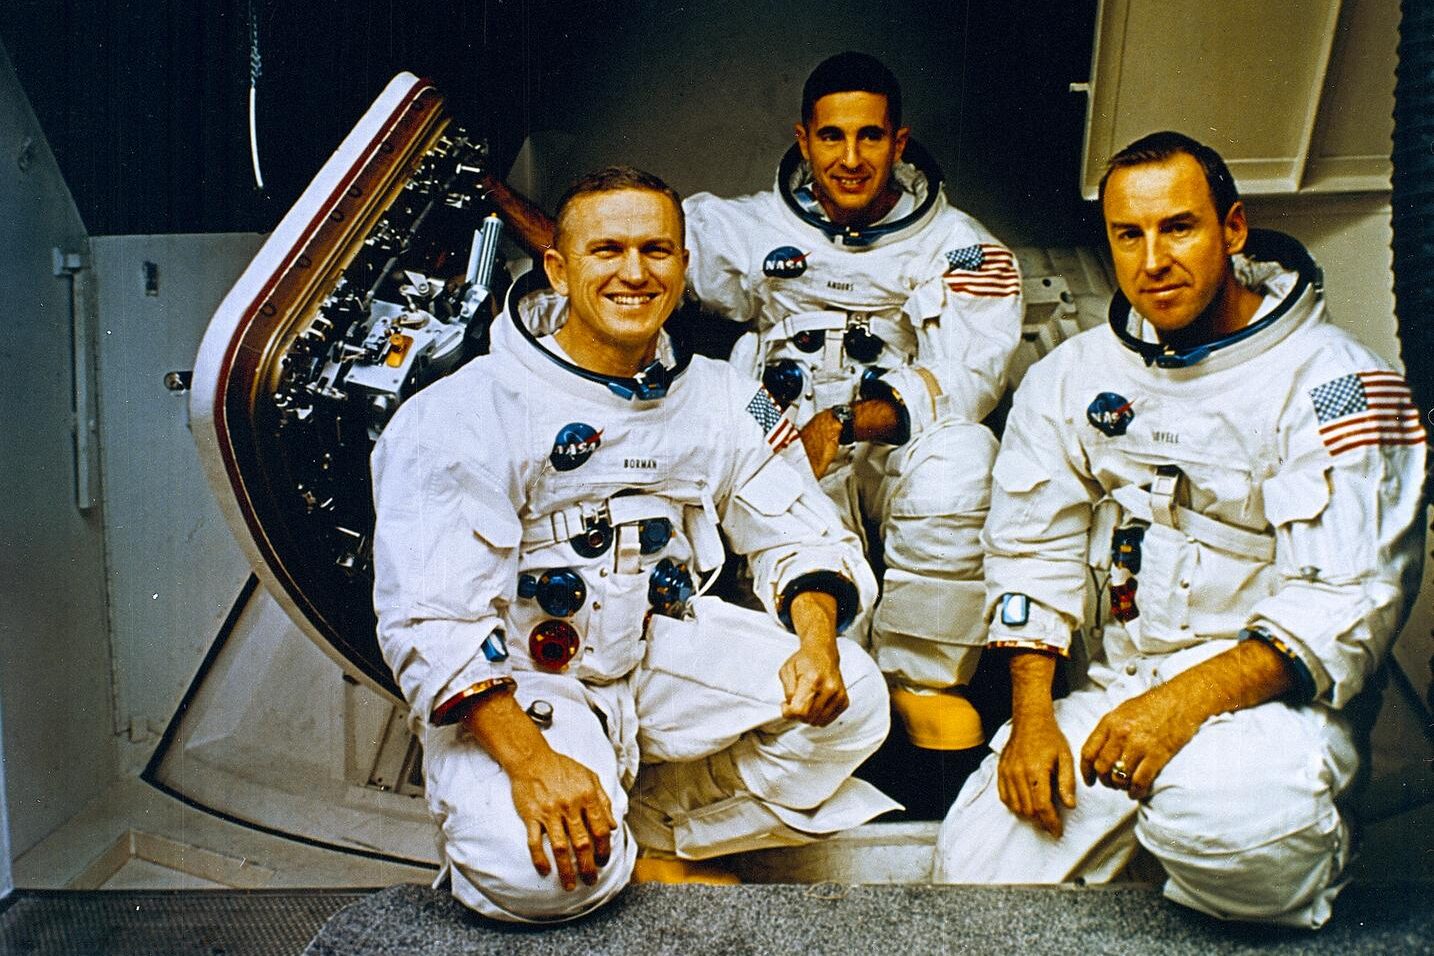 The Apollo 8 Crew (L to R) Frank Borman, commander; William Anders, Lunar Module (LM) Pilot; and James Lovell, Command Module (CM) pilot pose in front of the Apollo mission simulator during training.